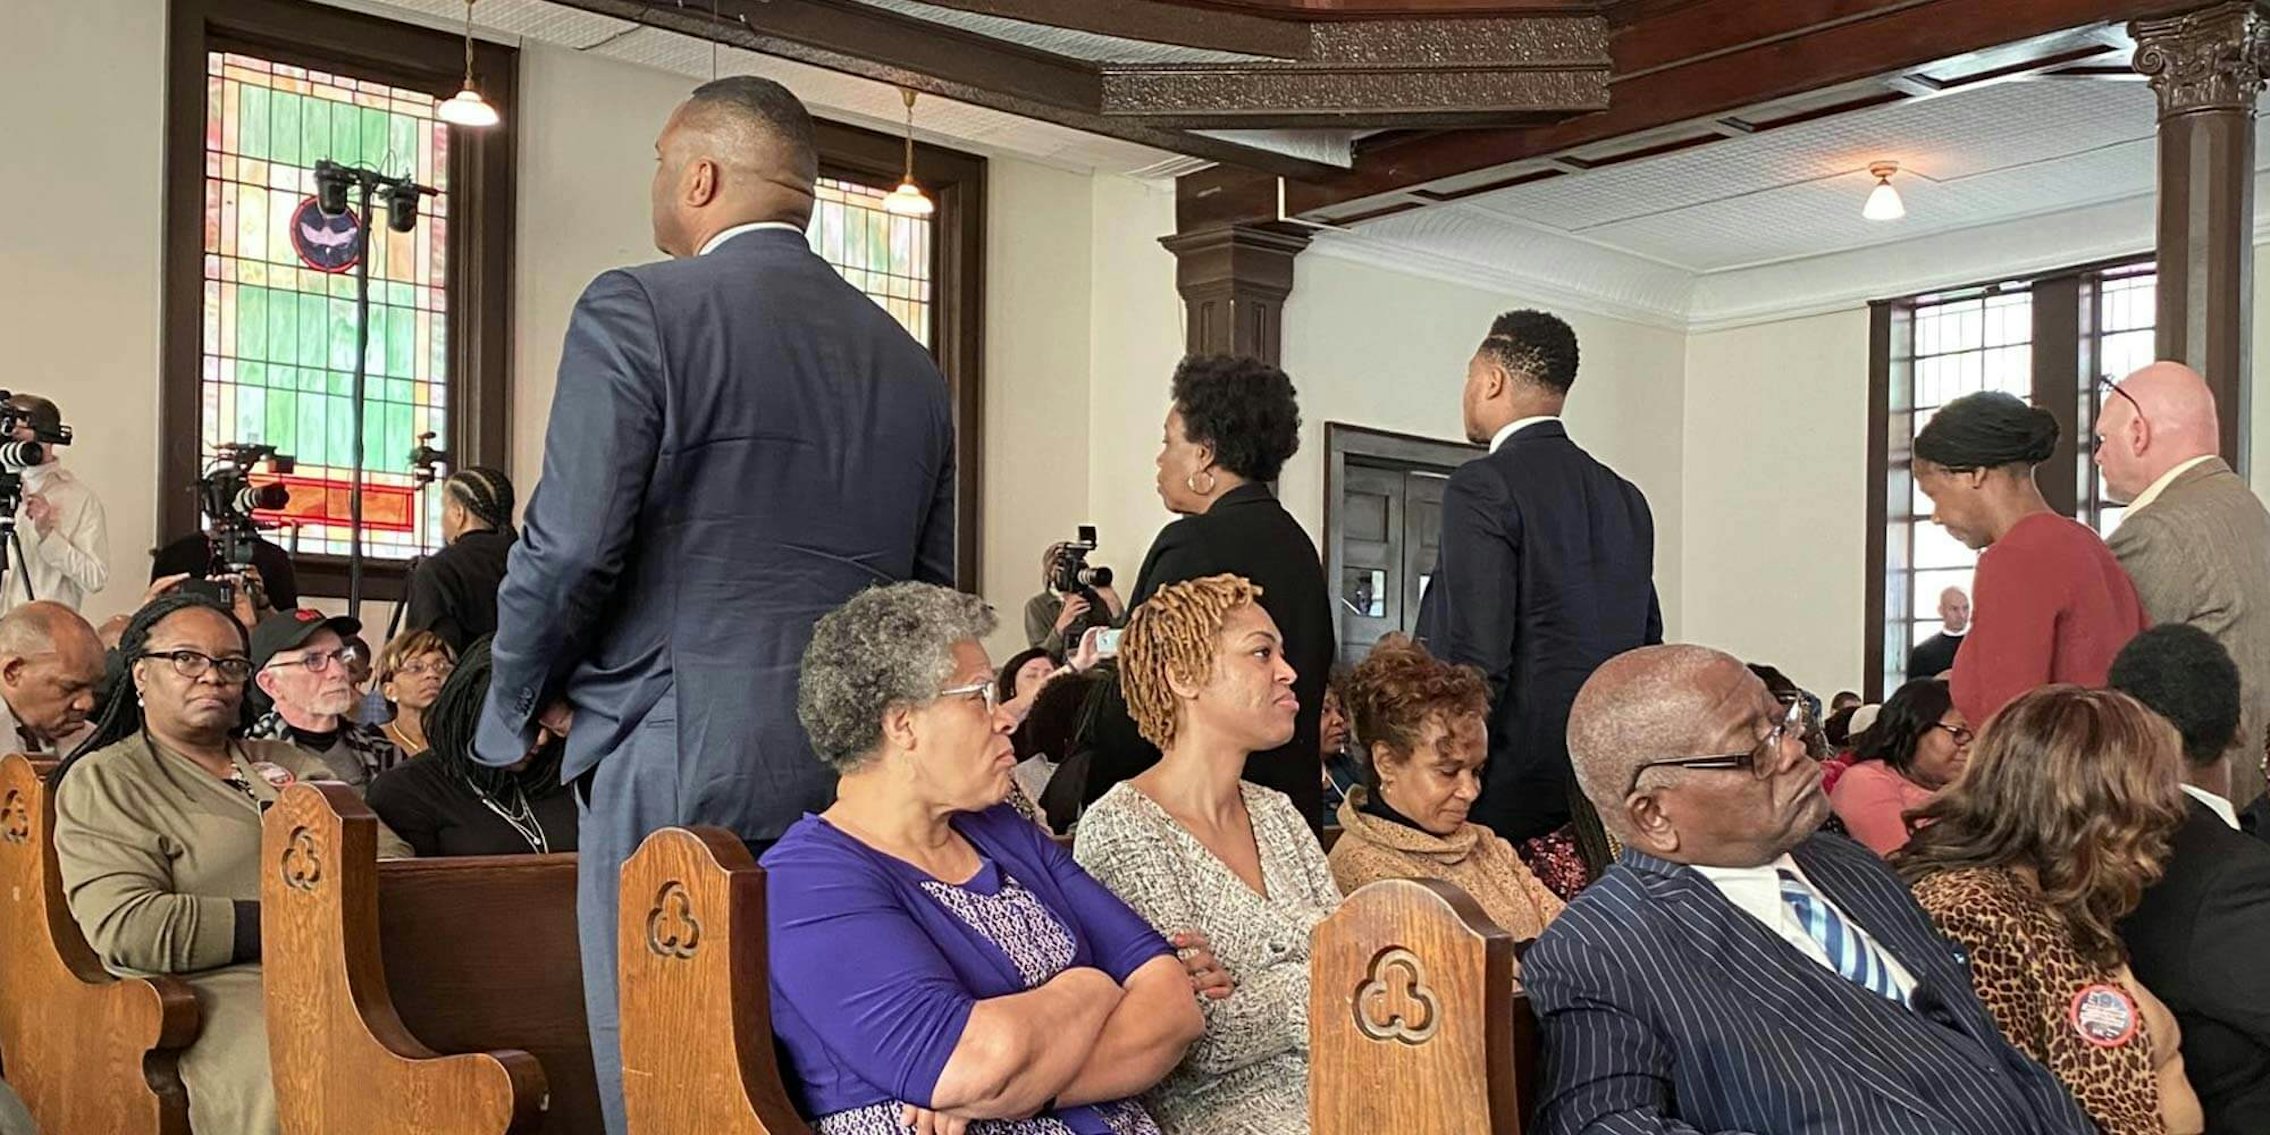 People at Selma church turning their backs on Michael Bloomberg